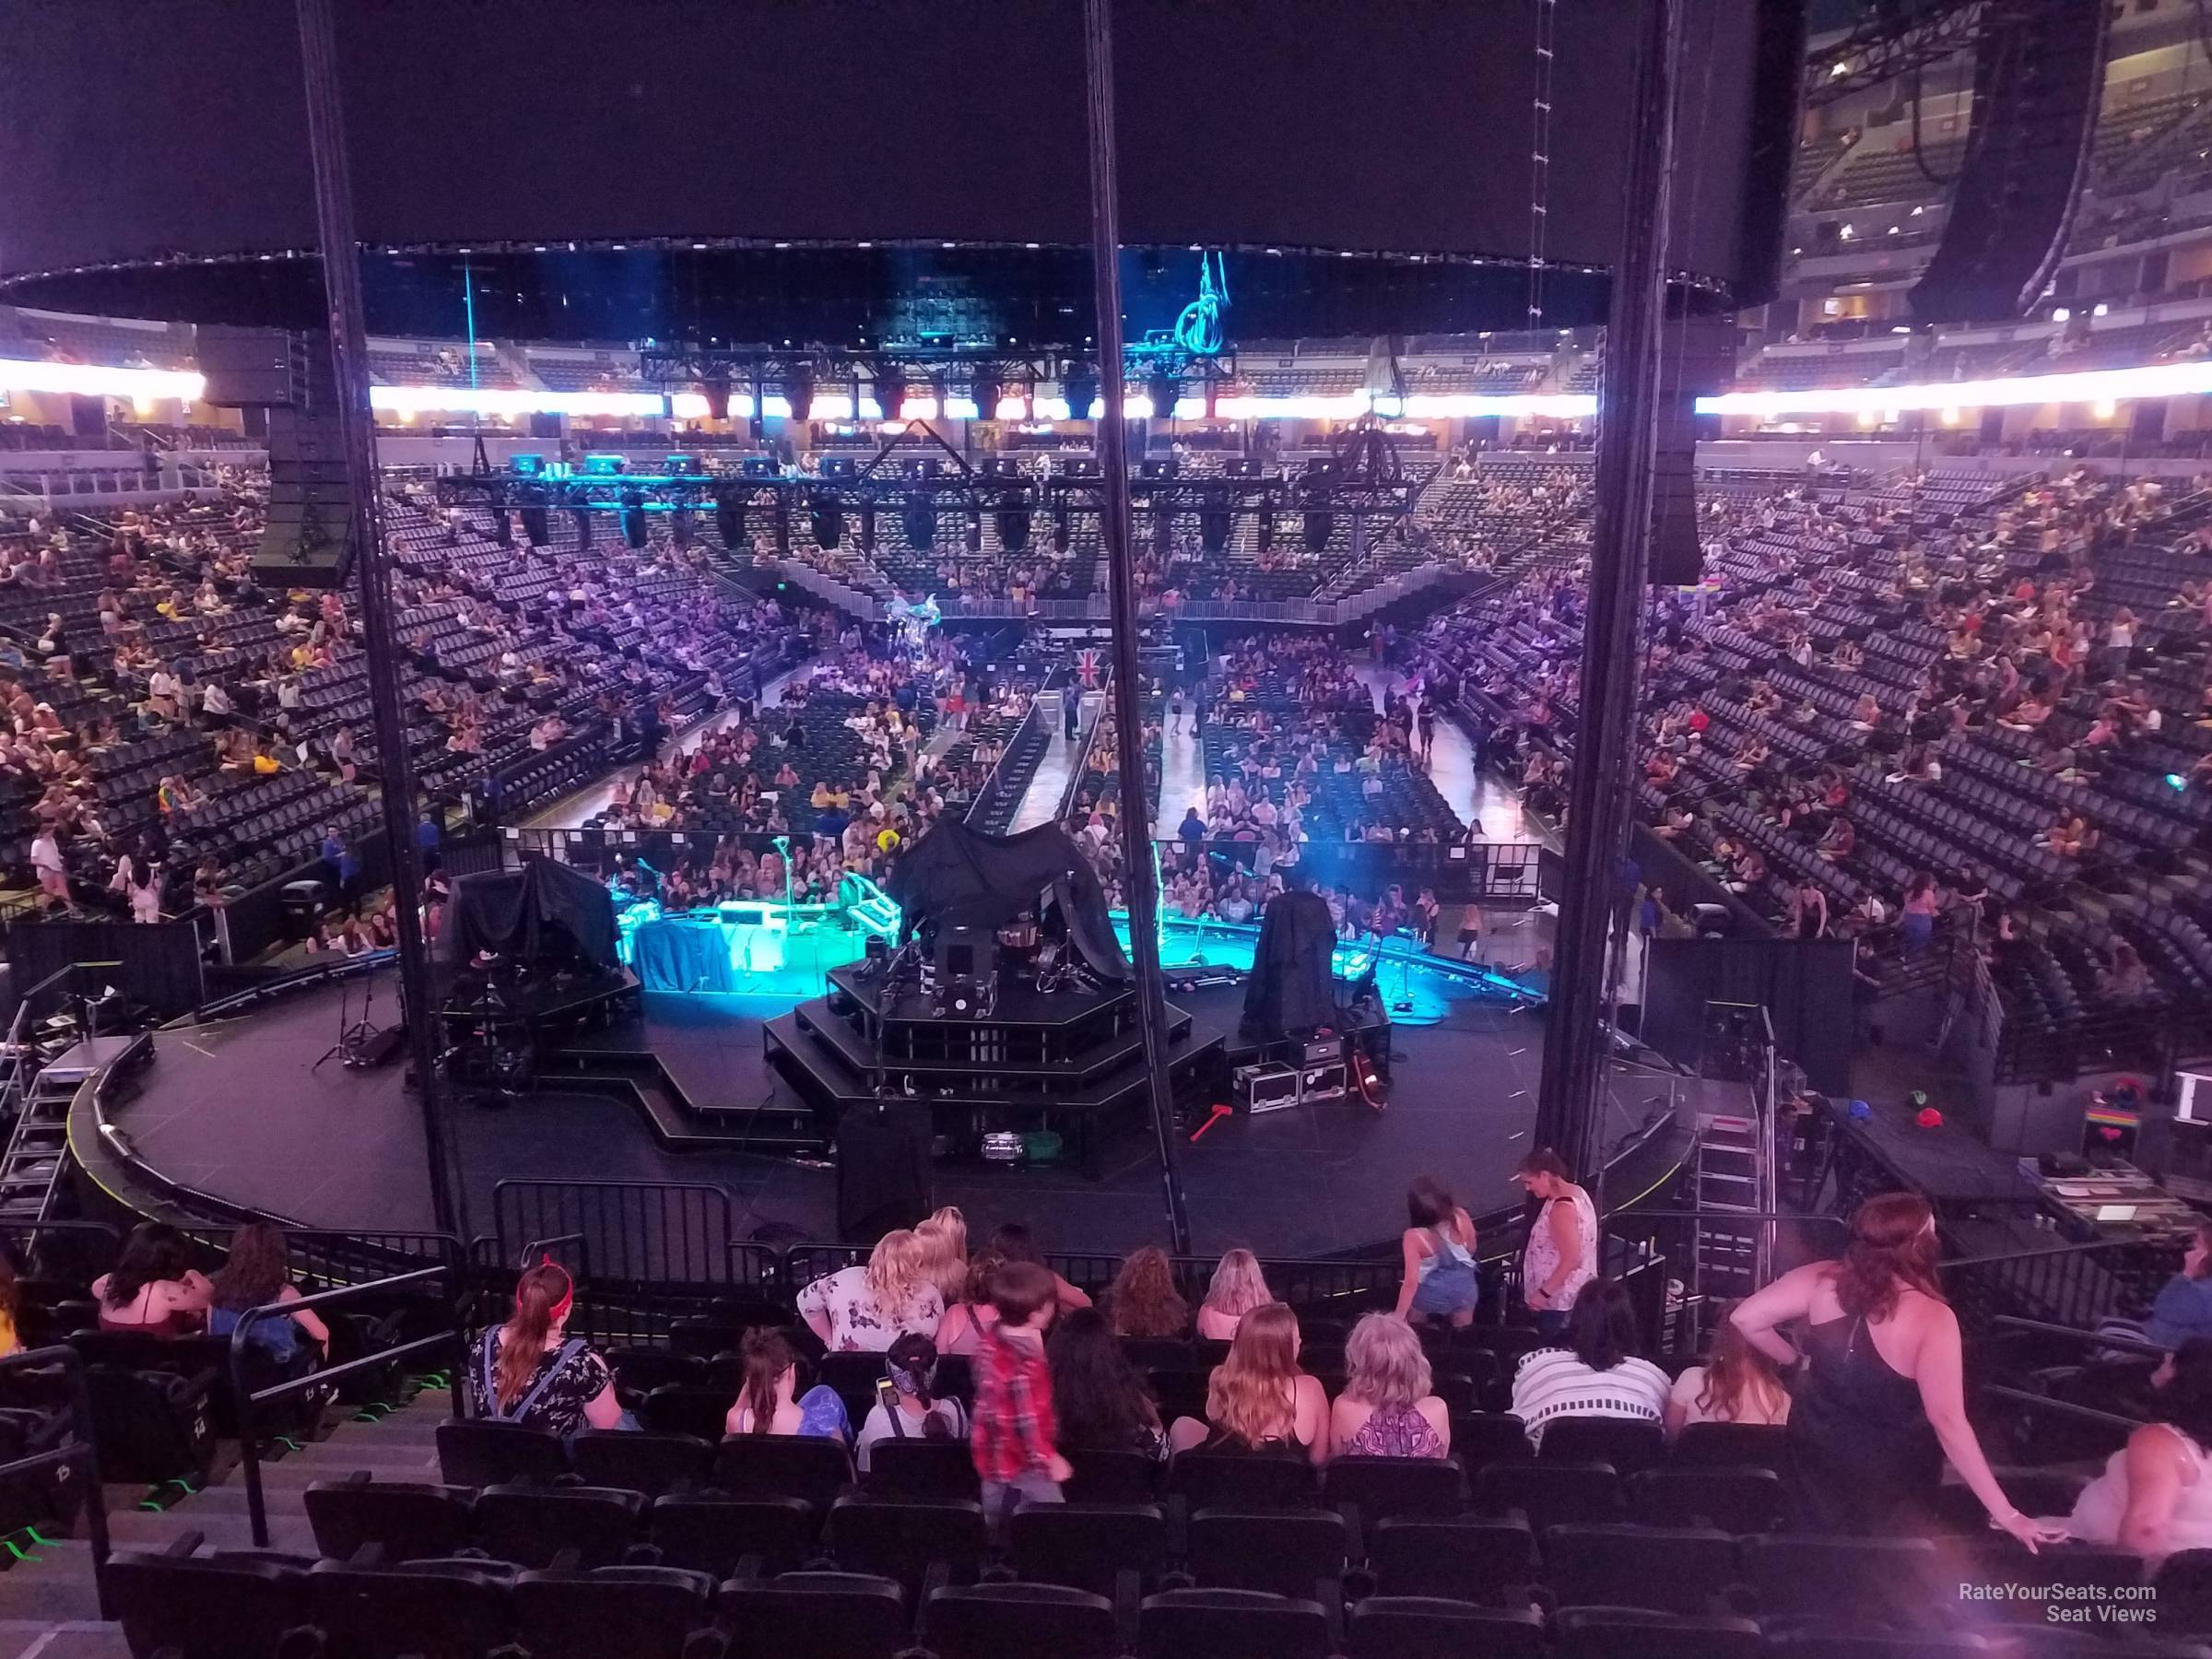 section 136, row 19 seat view  for concert - ball arena